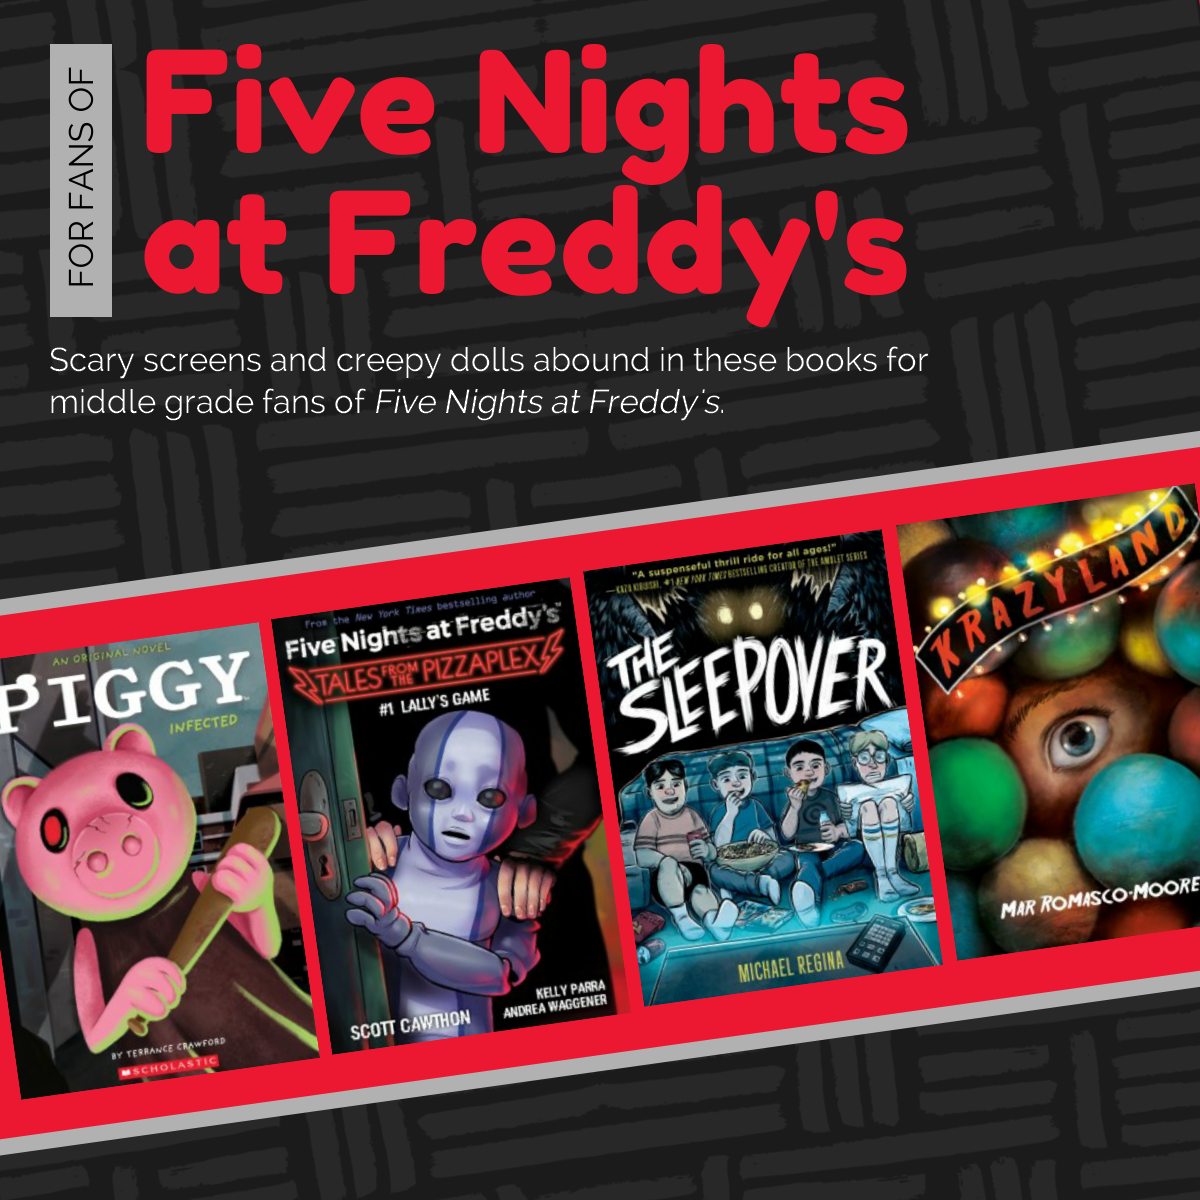 link to "for fans of five nights at freddy's" booklist